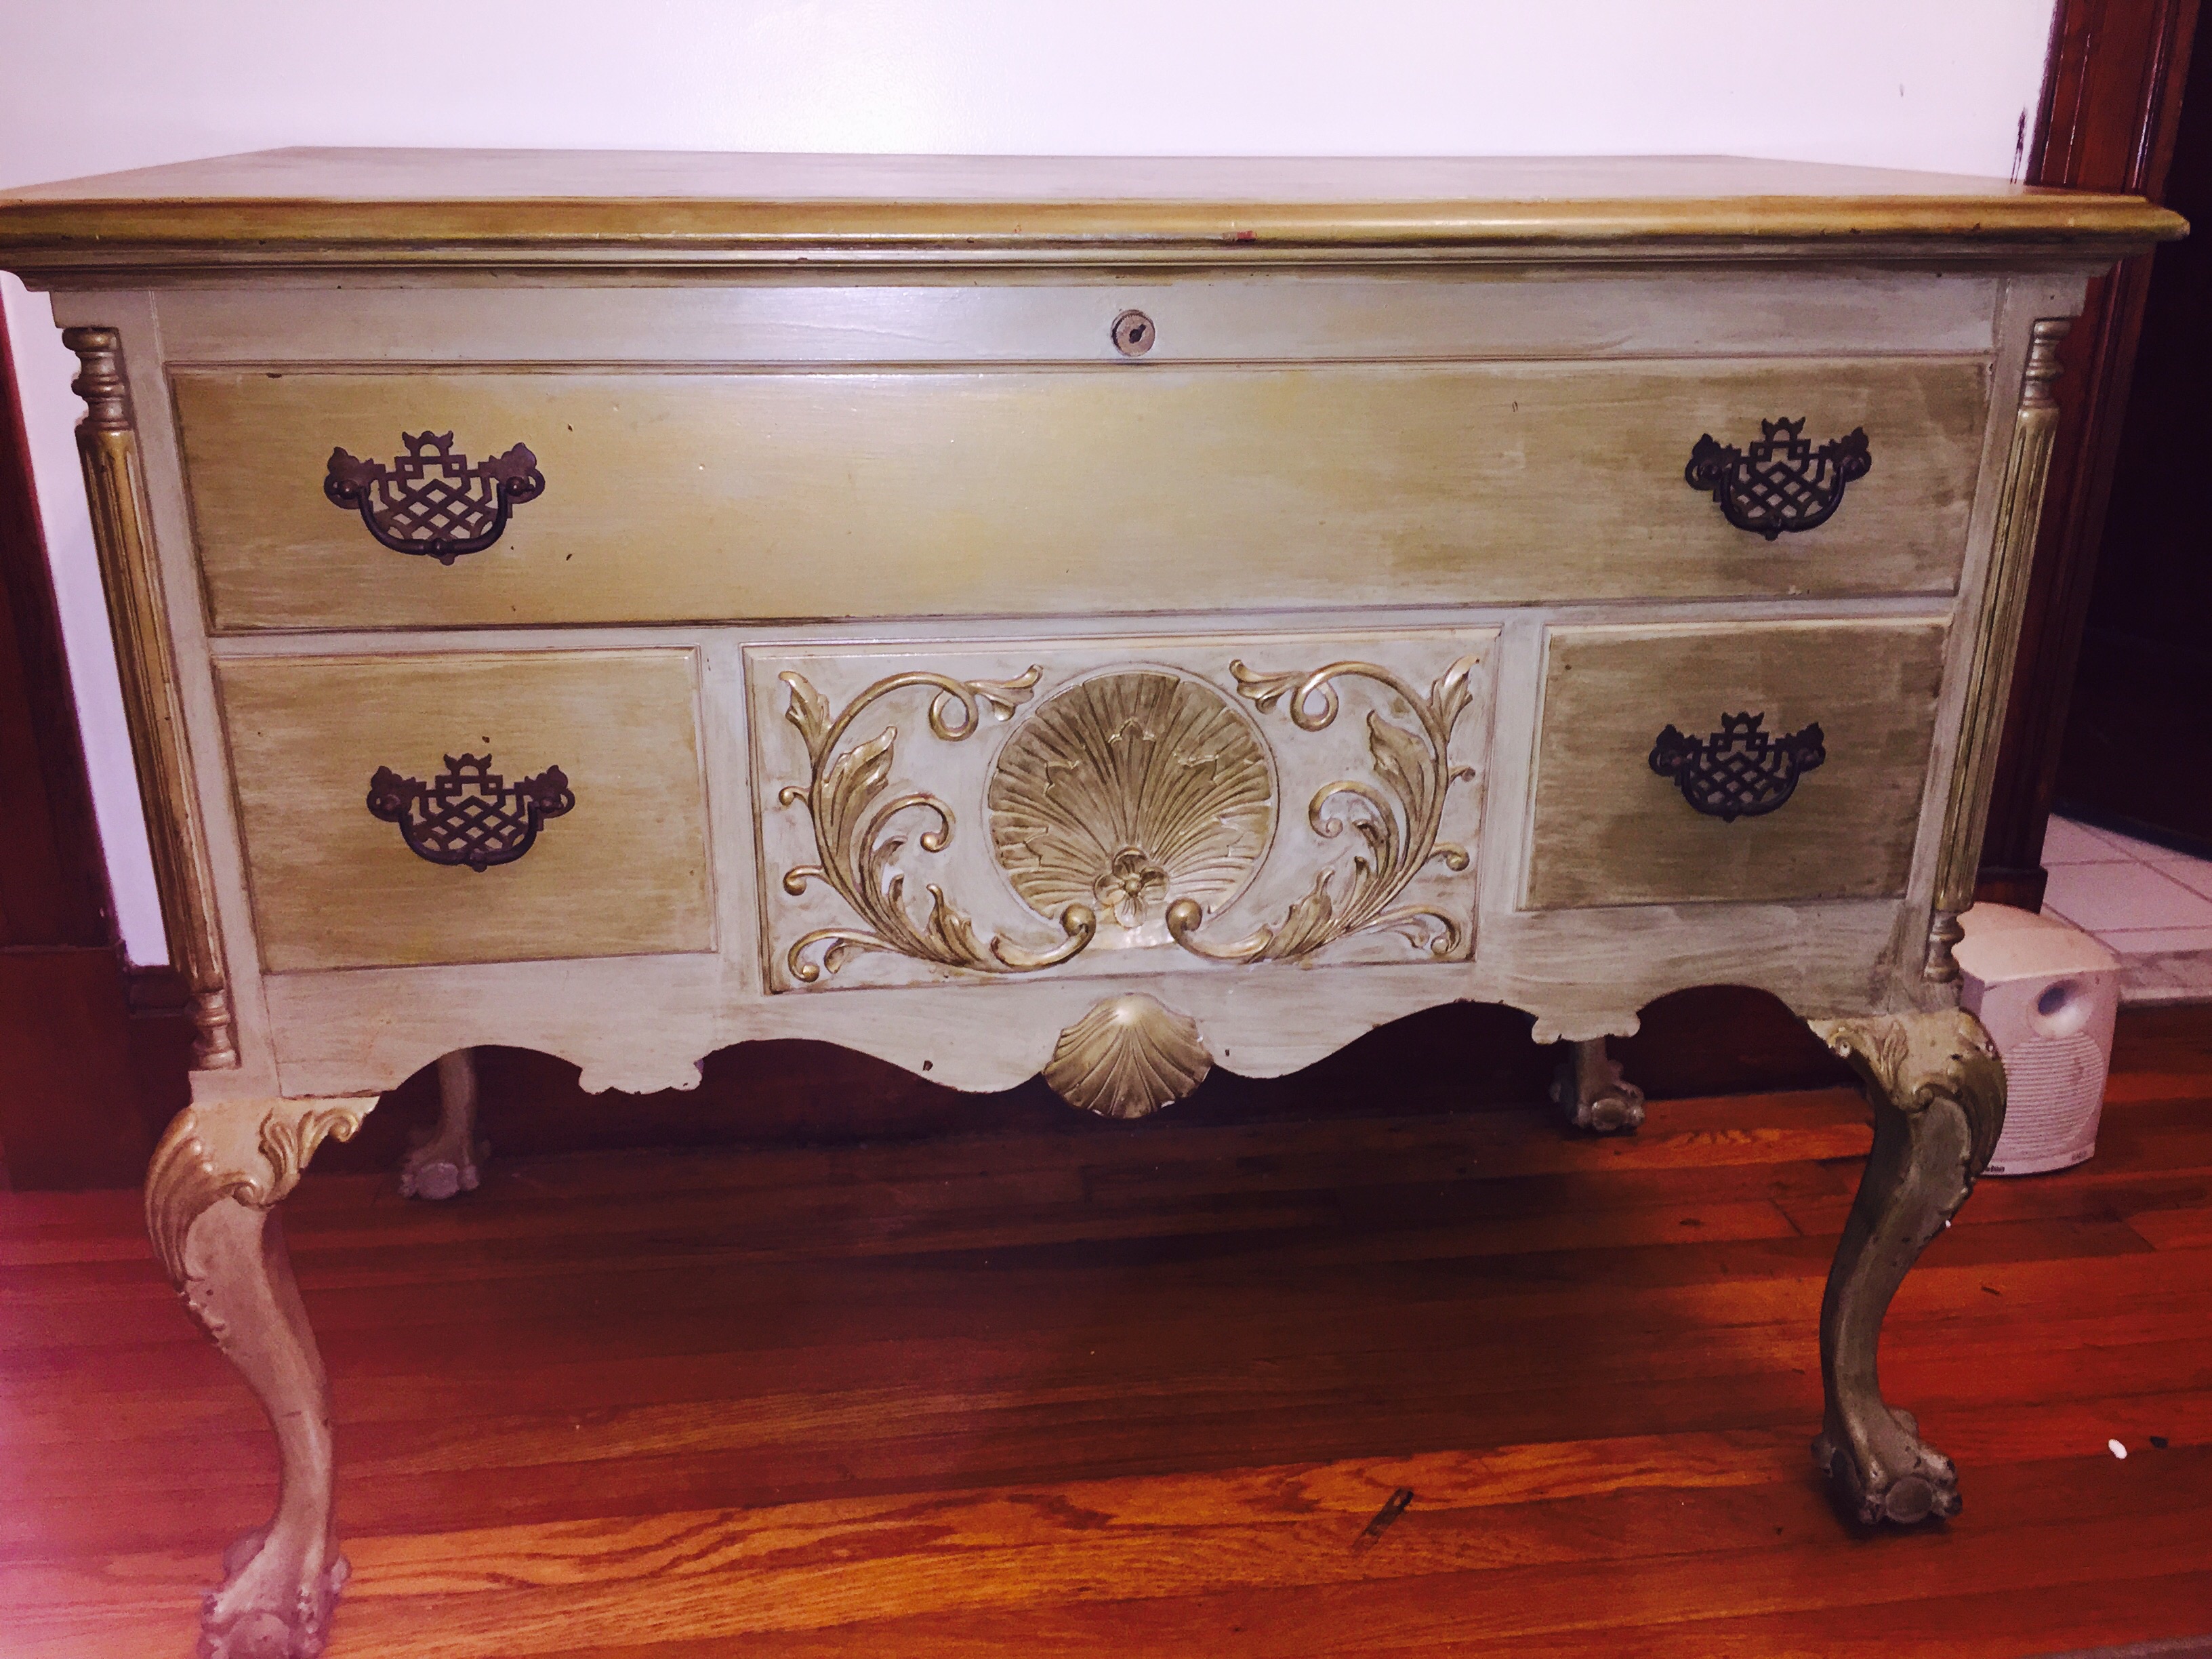 Antique Caswell Runyan Cedar Chest For Sale | 0 | Classifieds